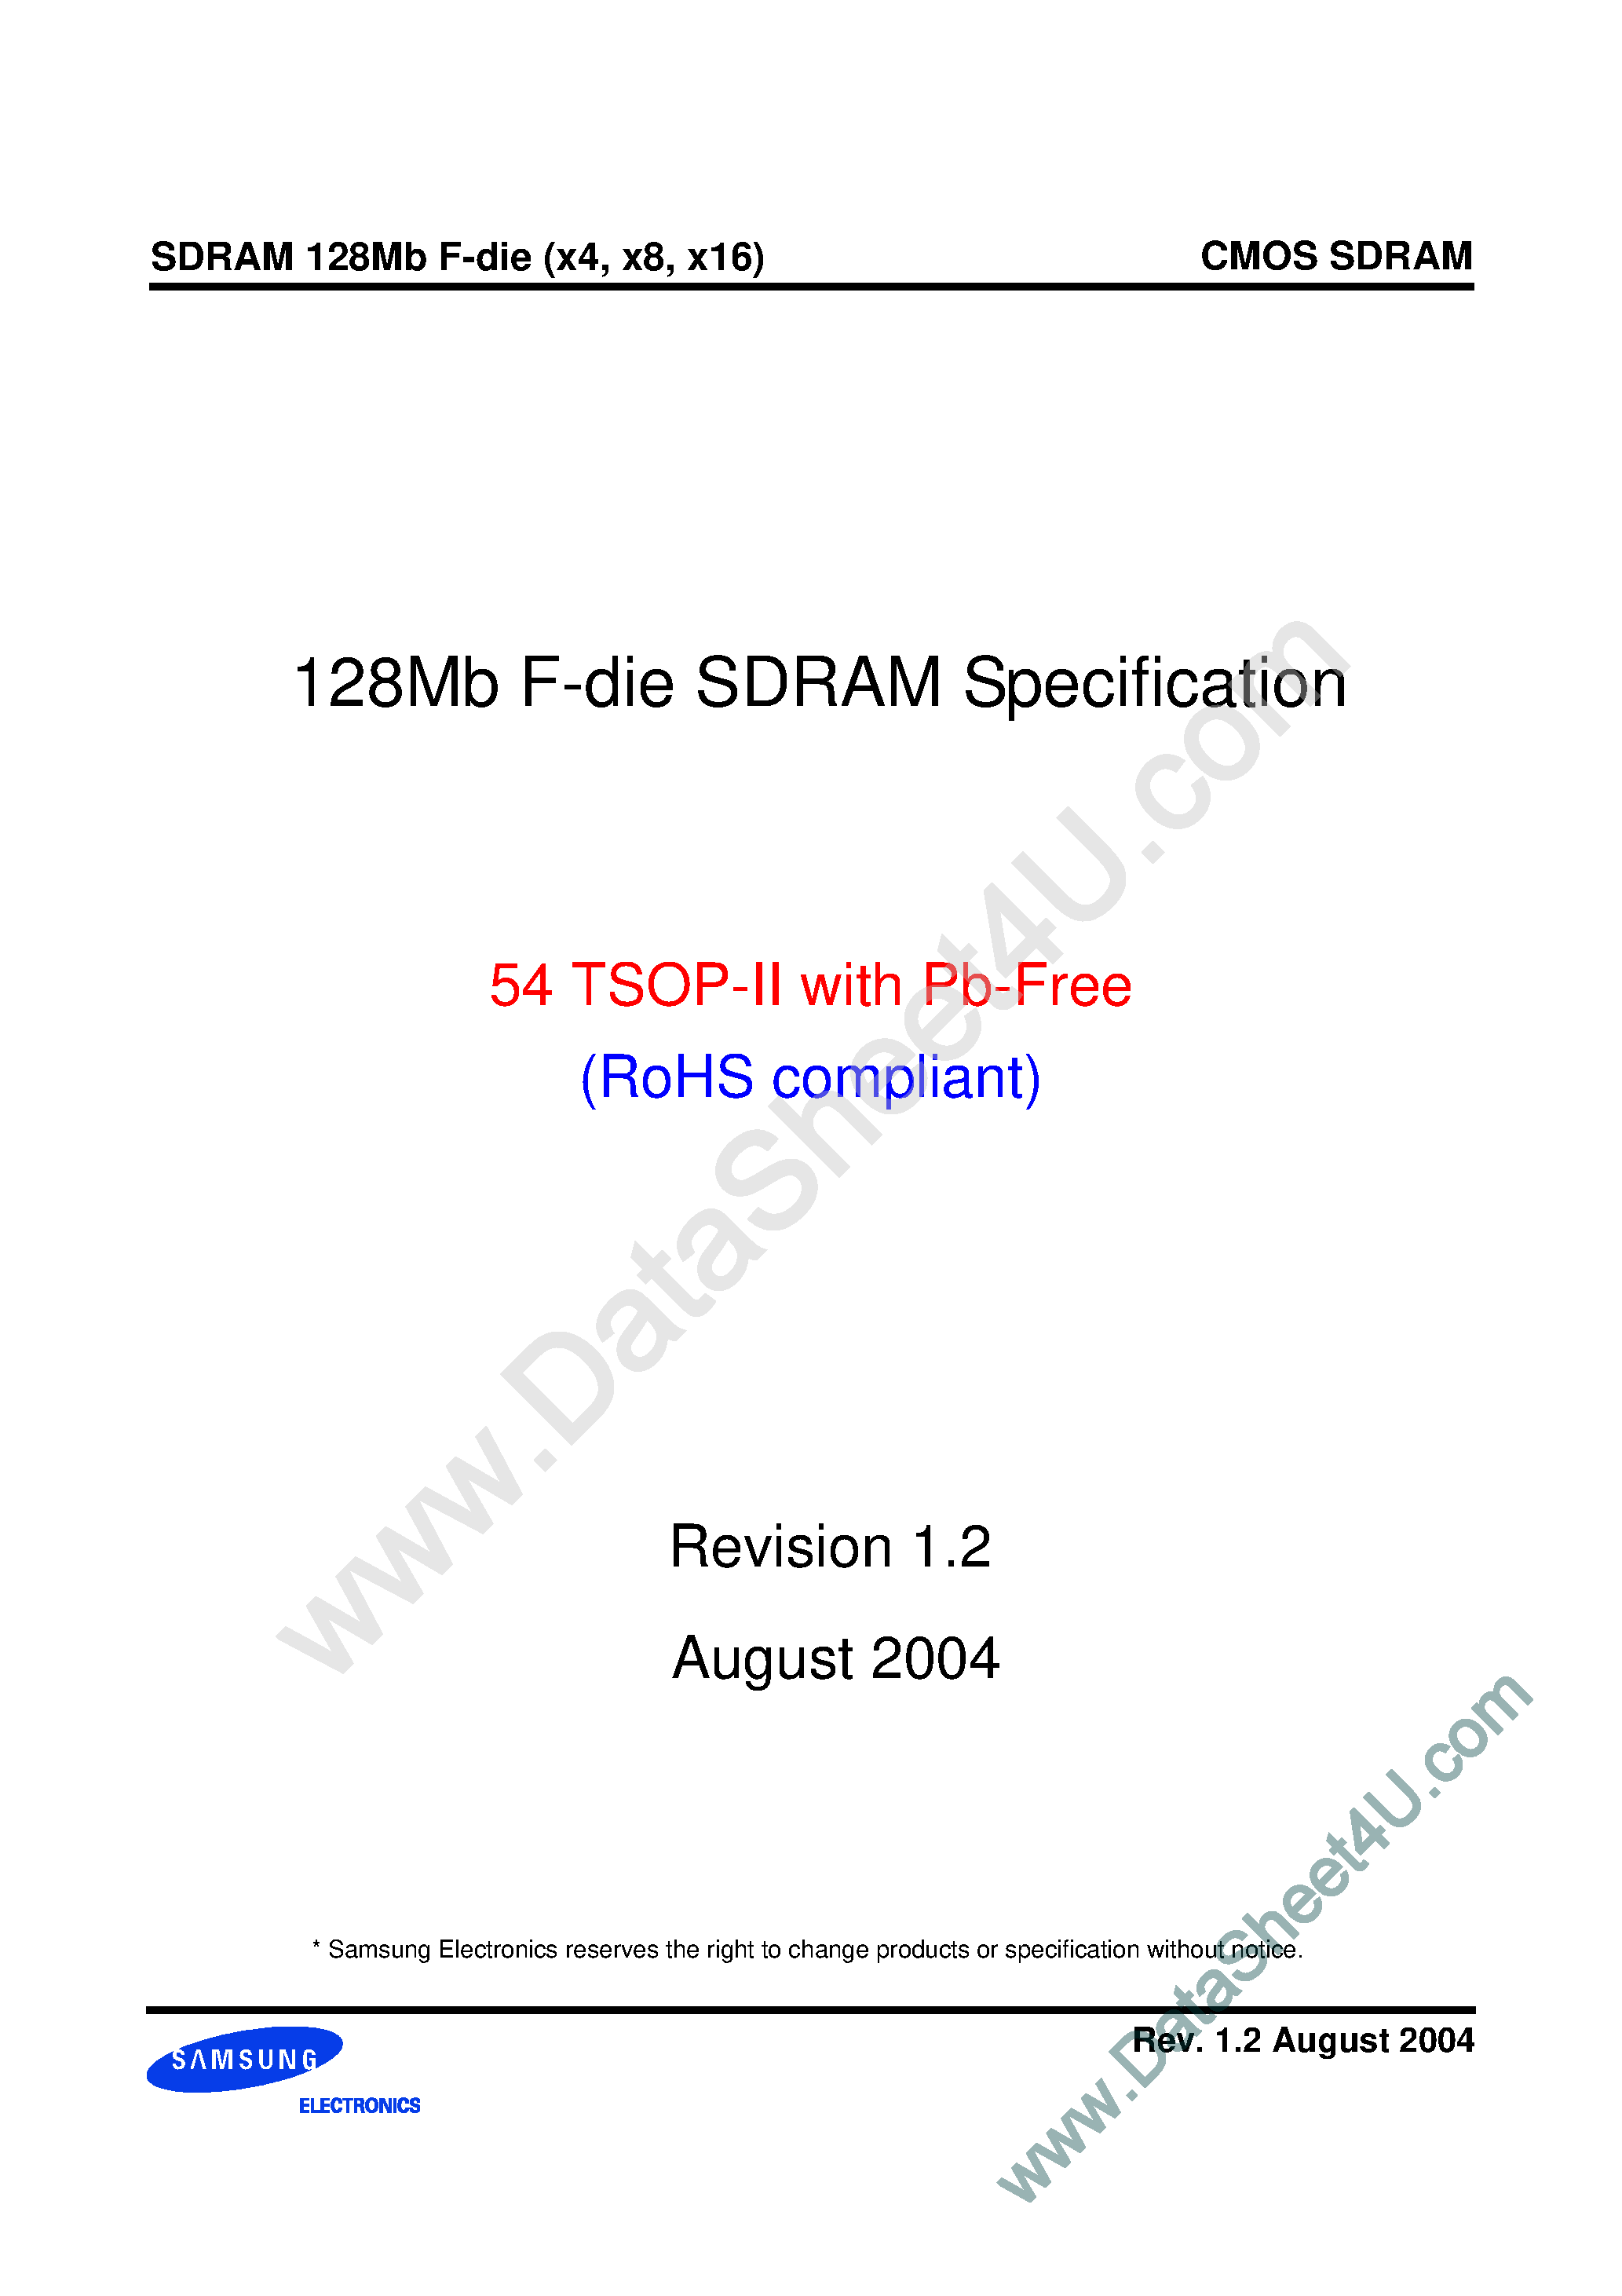 Datasheet K4S281632F-Uxx - 128Mb F-die SDRAM Specification 54 TSOP-II with Pb-Free (RoHS compliant) page 1